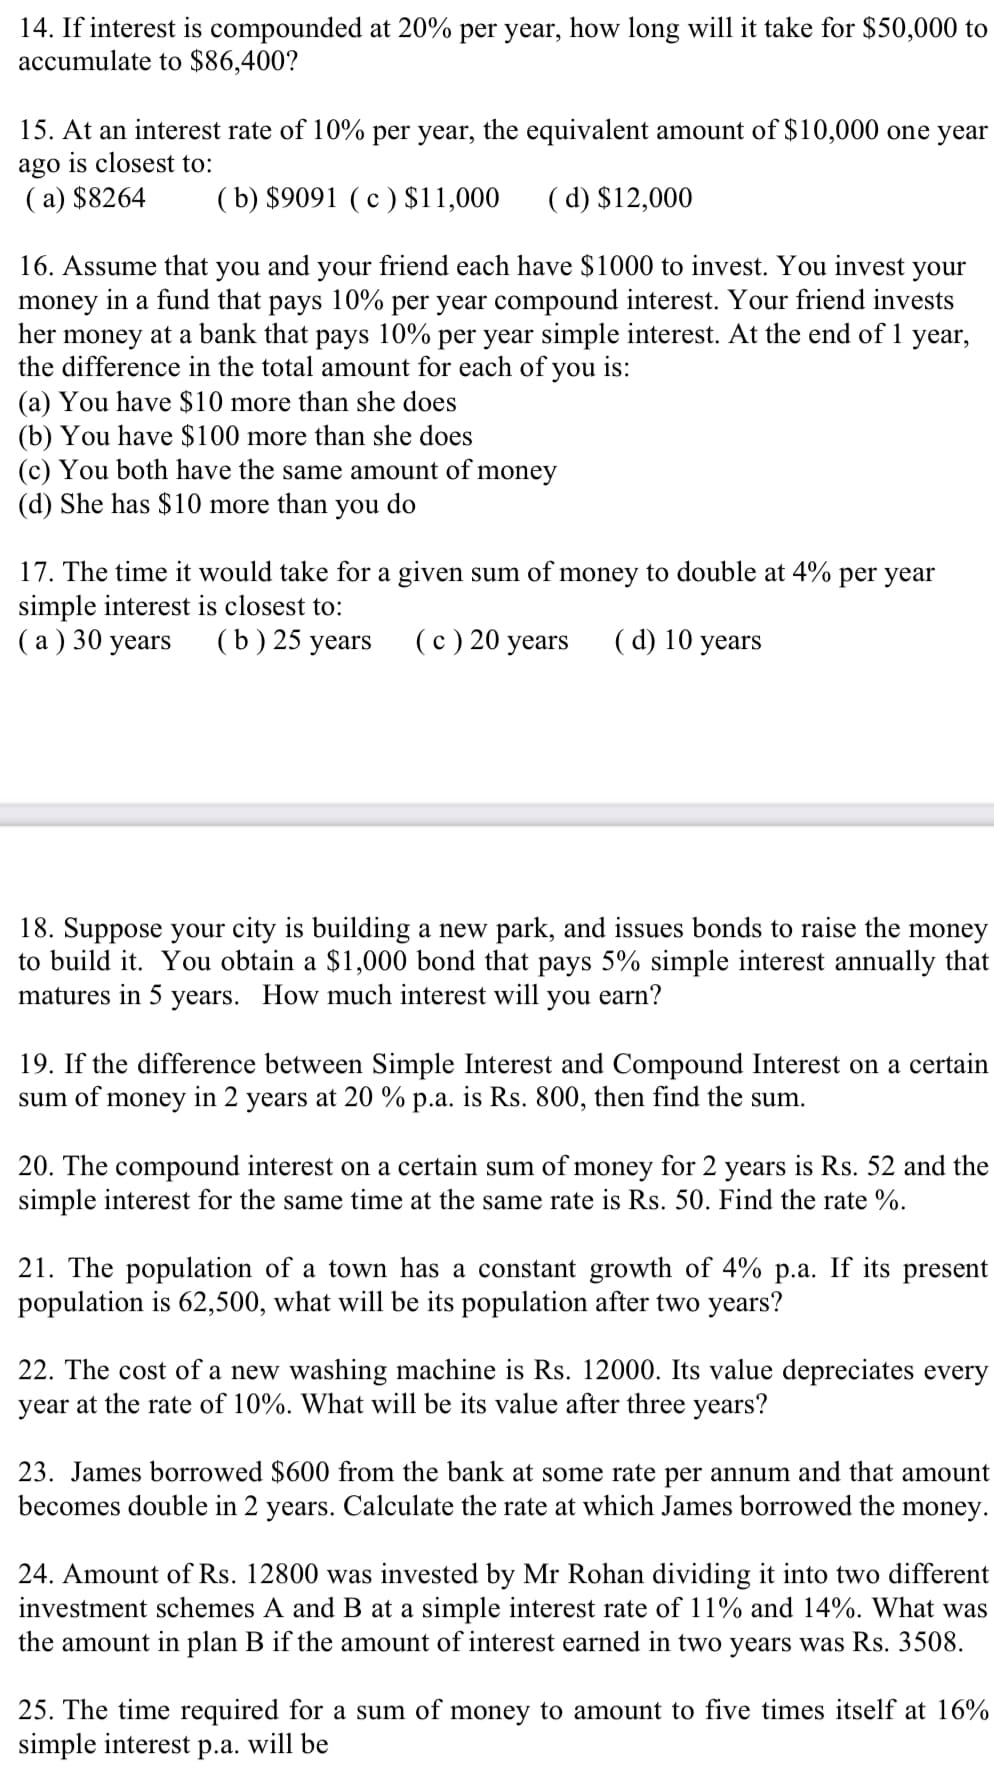 14. If interest is compounded at 20% per year, how long will it take for $50,000 to
accumulate to $86,400?
15. At an interest rate of 10% per year, the equivalent amount of $10,000 one year
ago is closest to:
(a) $8264
(b) $9091 (c) $11,000 (d) $12,000
16. Assume that you and your friend each have $1000 to invest. You invest your
money in a fund that pays 10% per year compound interest. Your friend invests
her money at a bank that pays 10% per year simple interest. At the end of 1 year,
the difference in the total amount for each of you is:
(a) You have $10 more than she does
(b) You have $100 more than she does
(c) You both have the same amount of money
(d) She has $10 more than you do
17. The time it would take for a given sum of money to double at 4% per year
simple interest is closest to:
(a) 30 years (b) 25 years
(c) 20 years (d) 10 years
18. Suppose your city is building a new park, and issues bonds to raise the money
to build it. You obtain a $1,000 bond that pays 5% simple interest annually that
matures in 5 years. How much interest will you earn?
19. If the difference between Simple Interest and Compound Interest on a certain
sum of money in 2 years at 20 % p.a. is Rs. 800, then find the sum.
20. The compound interest on a certain sum of money for 2 years is Rs. 52 and the
simple interest for the same time at the same rate is Rs. 50. Find the rate %.
21. The population of a town has a constant growth of 4% p.a. If its present
population is 62,500, what will be its population after two years?
22. The cost of a new washing machine is Rs. 12000. Its value depreciates every
year at the rate of 10%. What will be its value after three years?
23. James borrowed $600 from the bank at some rate per annum and that amount
becomes double in 2 years. Calculate the rate at which James borrowed the money.
24. Amount of Rs. 12800 was invested by Mr Rohan dividing it into two different
investment schemes A and B at a simple interest rate of 11% and 14%. What was
the amount in plan B if the amount of interest earned in two years was Rs. 3508.
25. The time required for a sum of money to amount to five times itself at 16%
simple interest p.a. will be